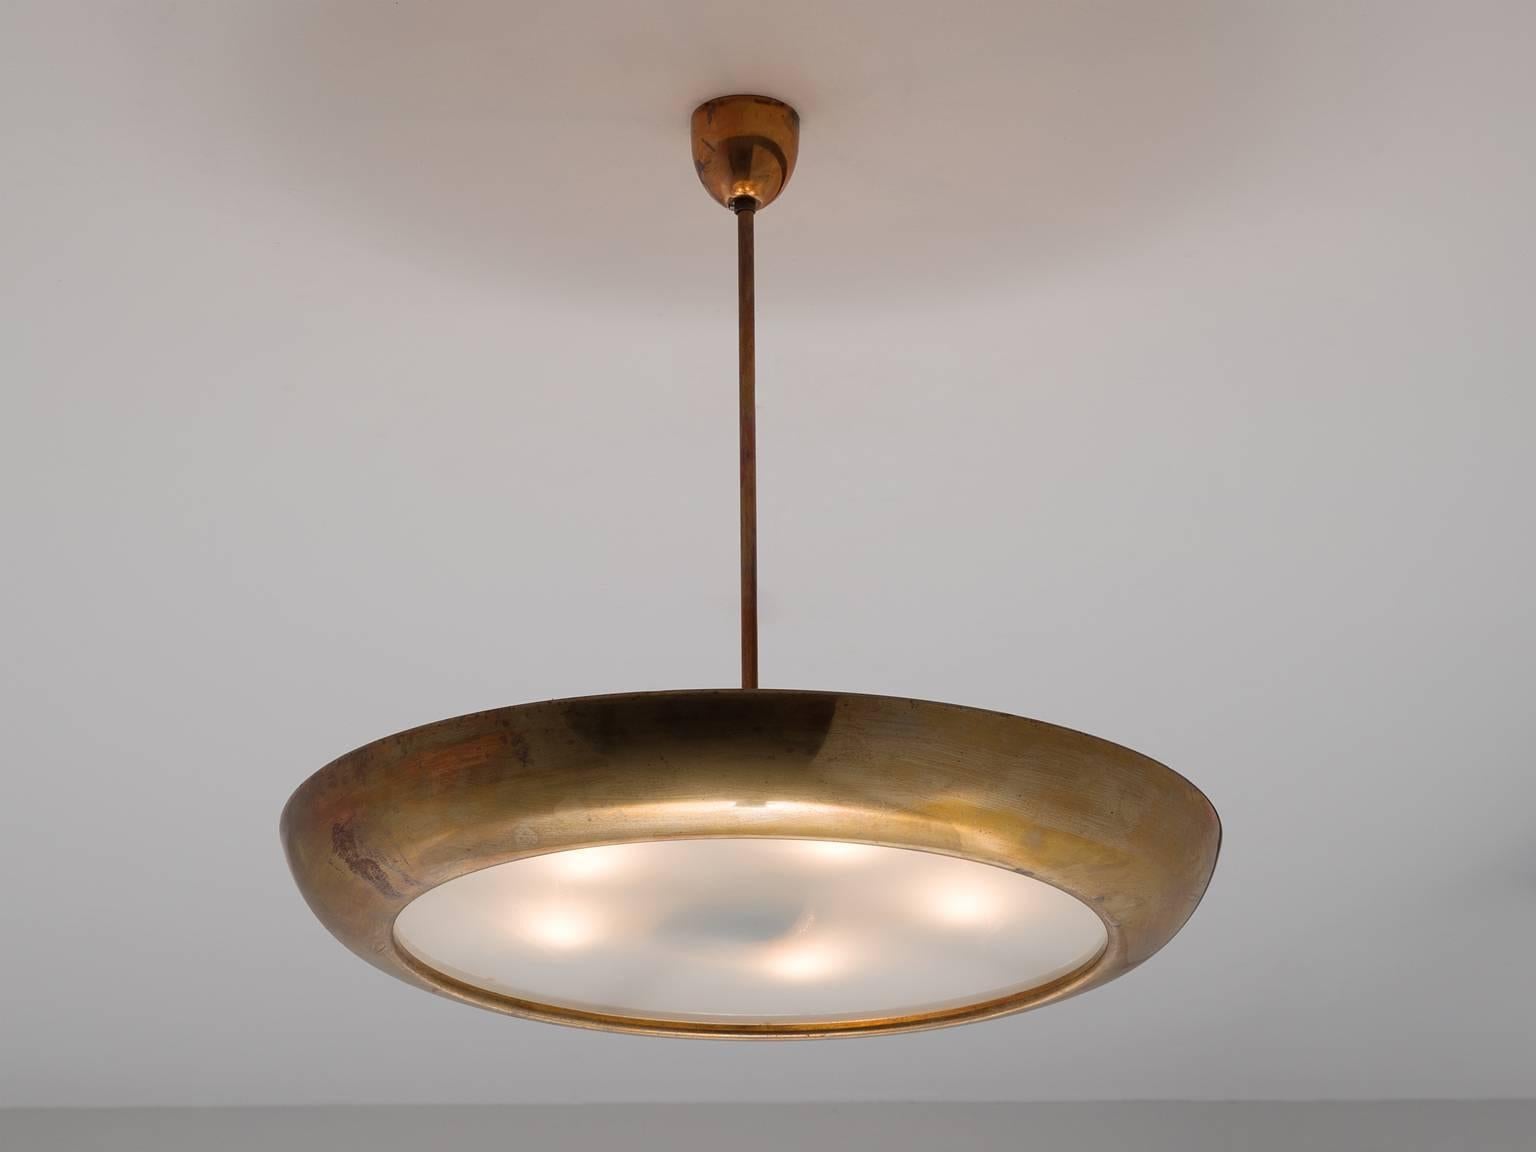 Large pendant, brass, Europe, 1970s.

This very large brass pendant is very sleek and organic at the same time. The lamp is Minimalist in the sense that there is no ornate decoration or additional details. The shade, which is shaped like a disc,